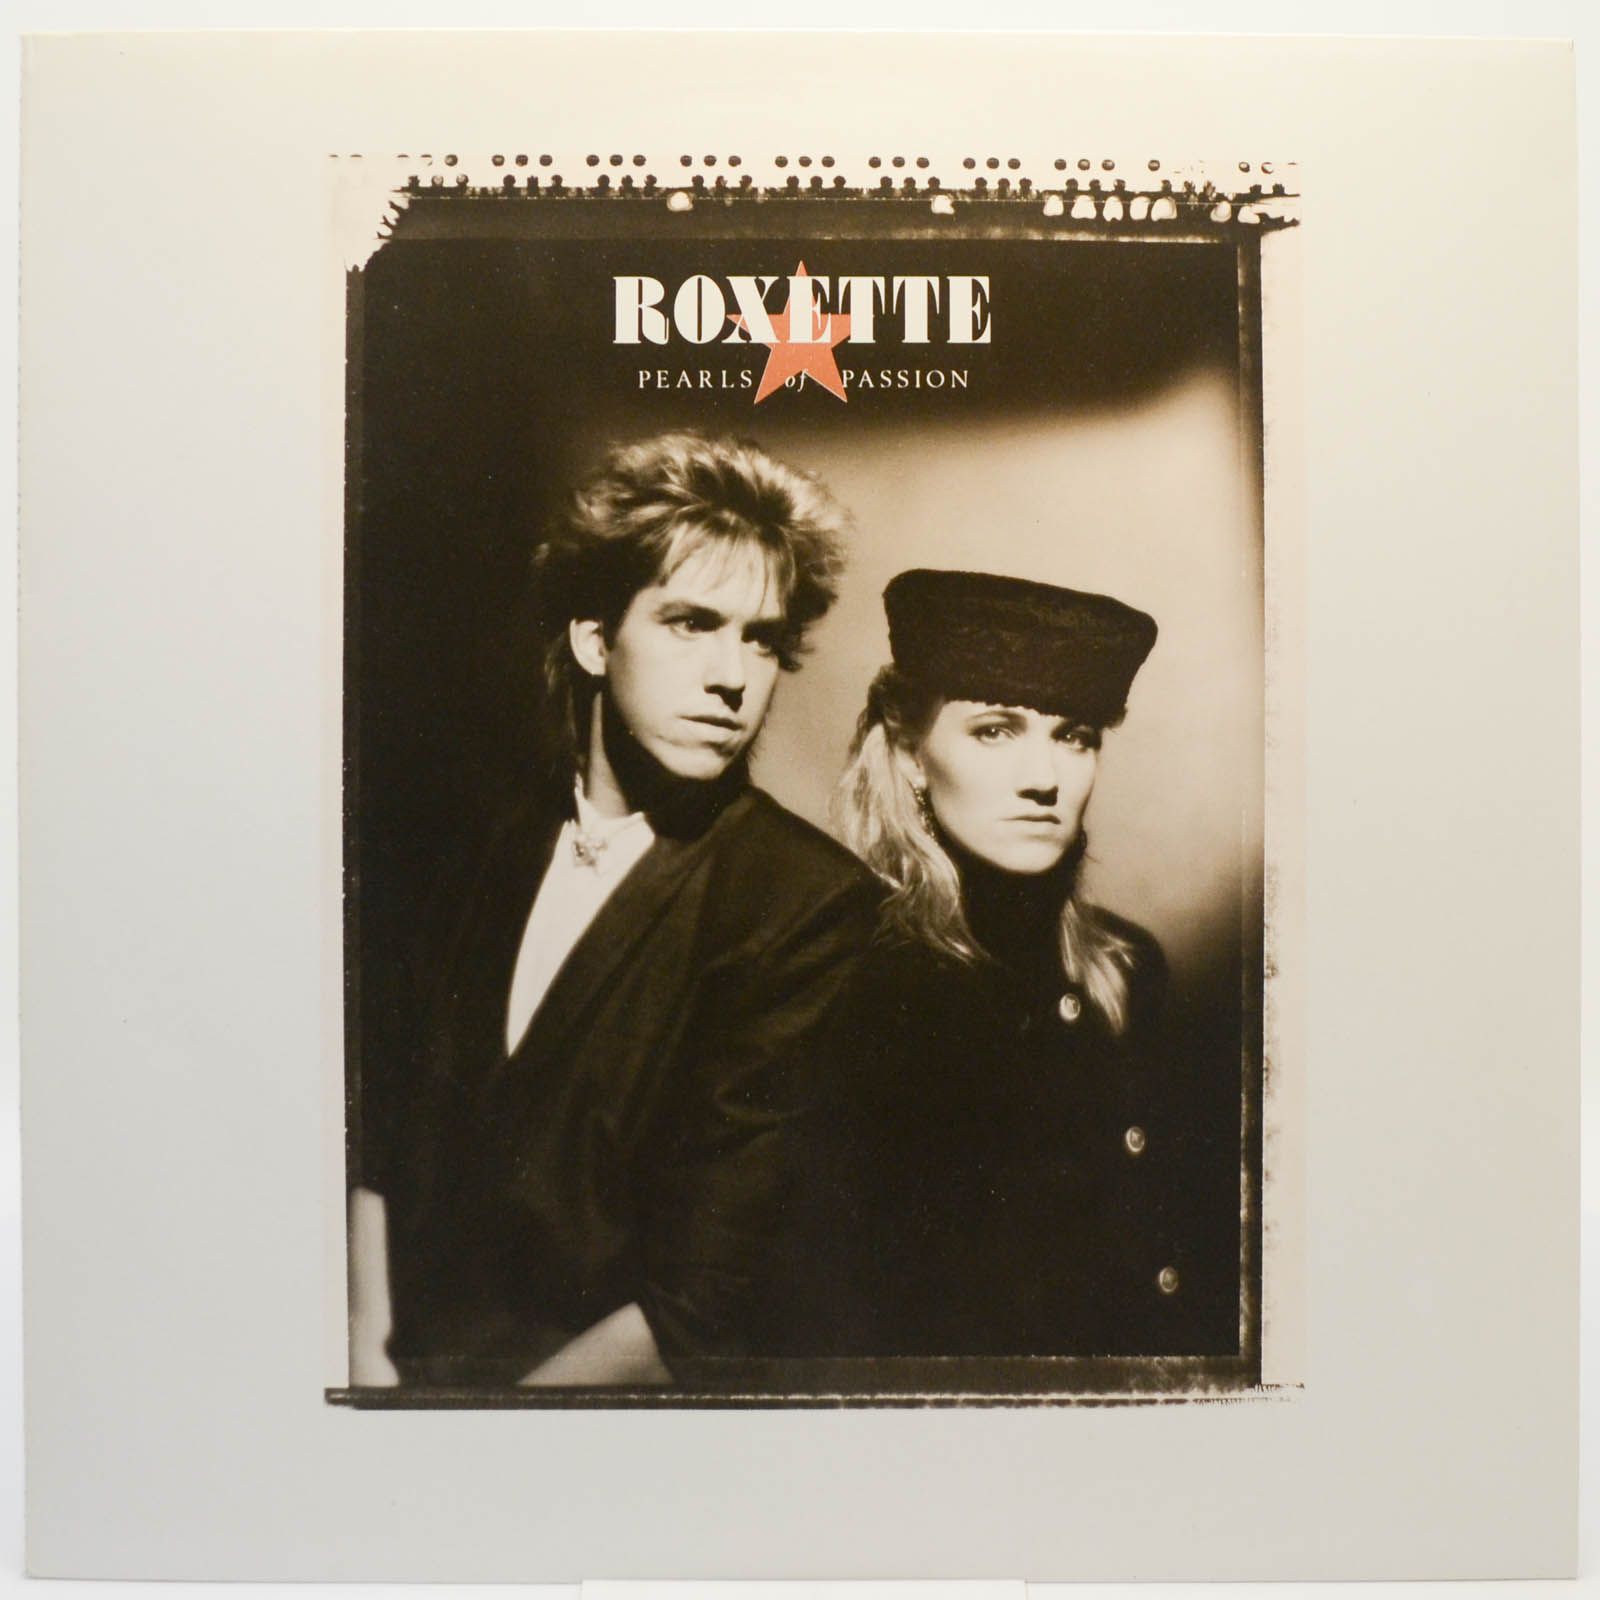 Roxette — Pearls Of Passion, 1986